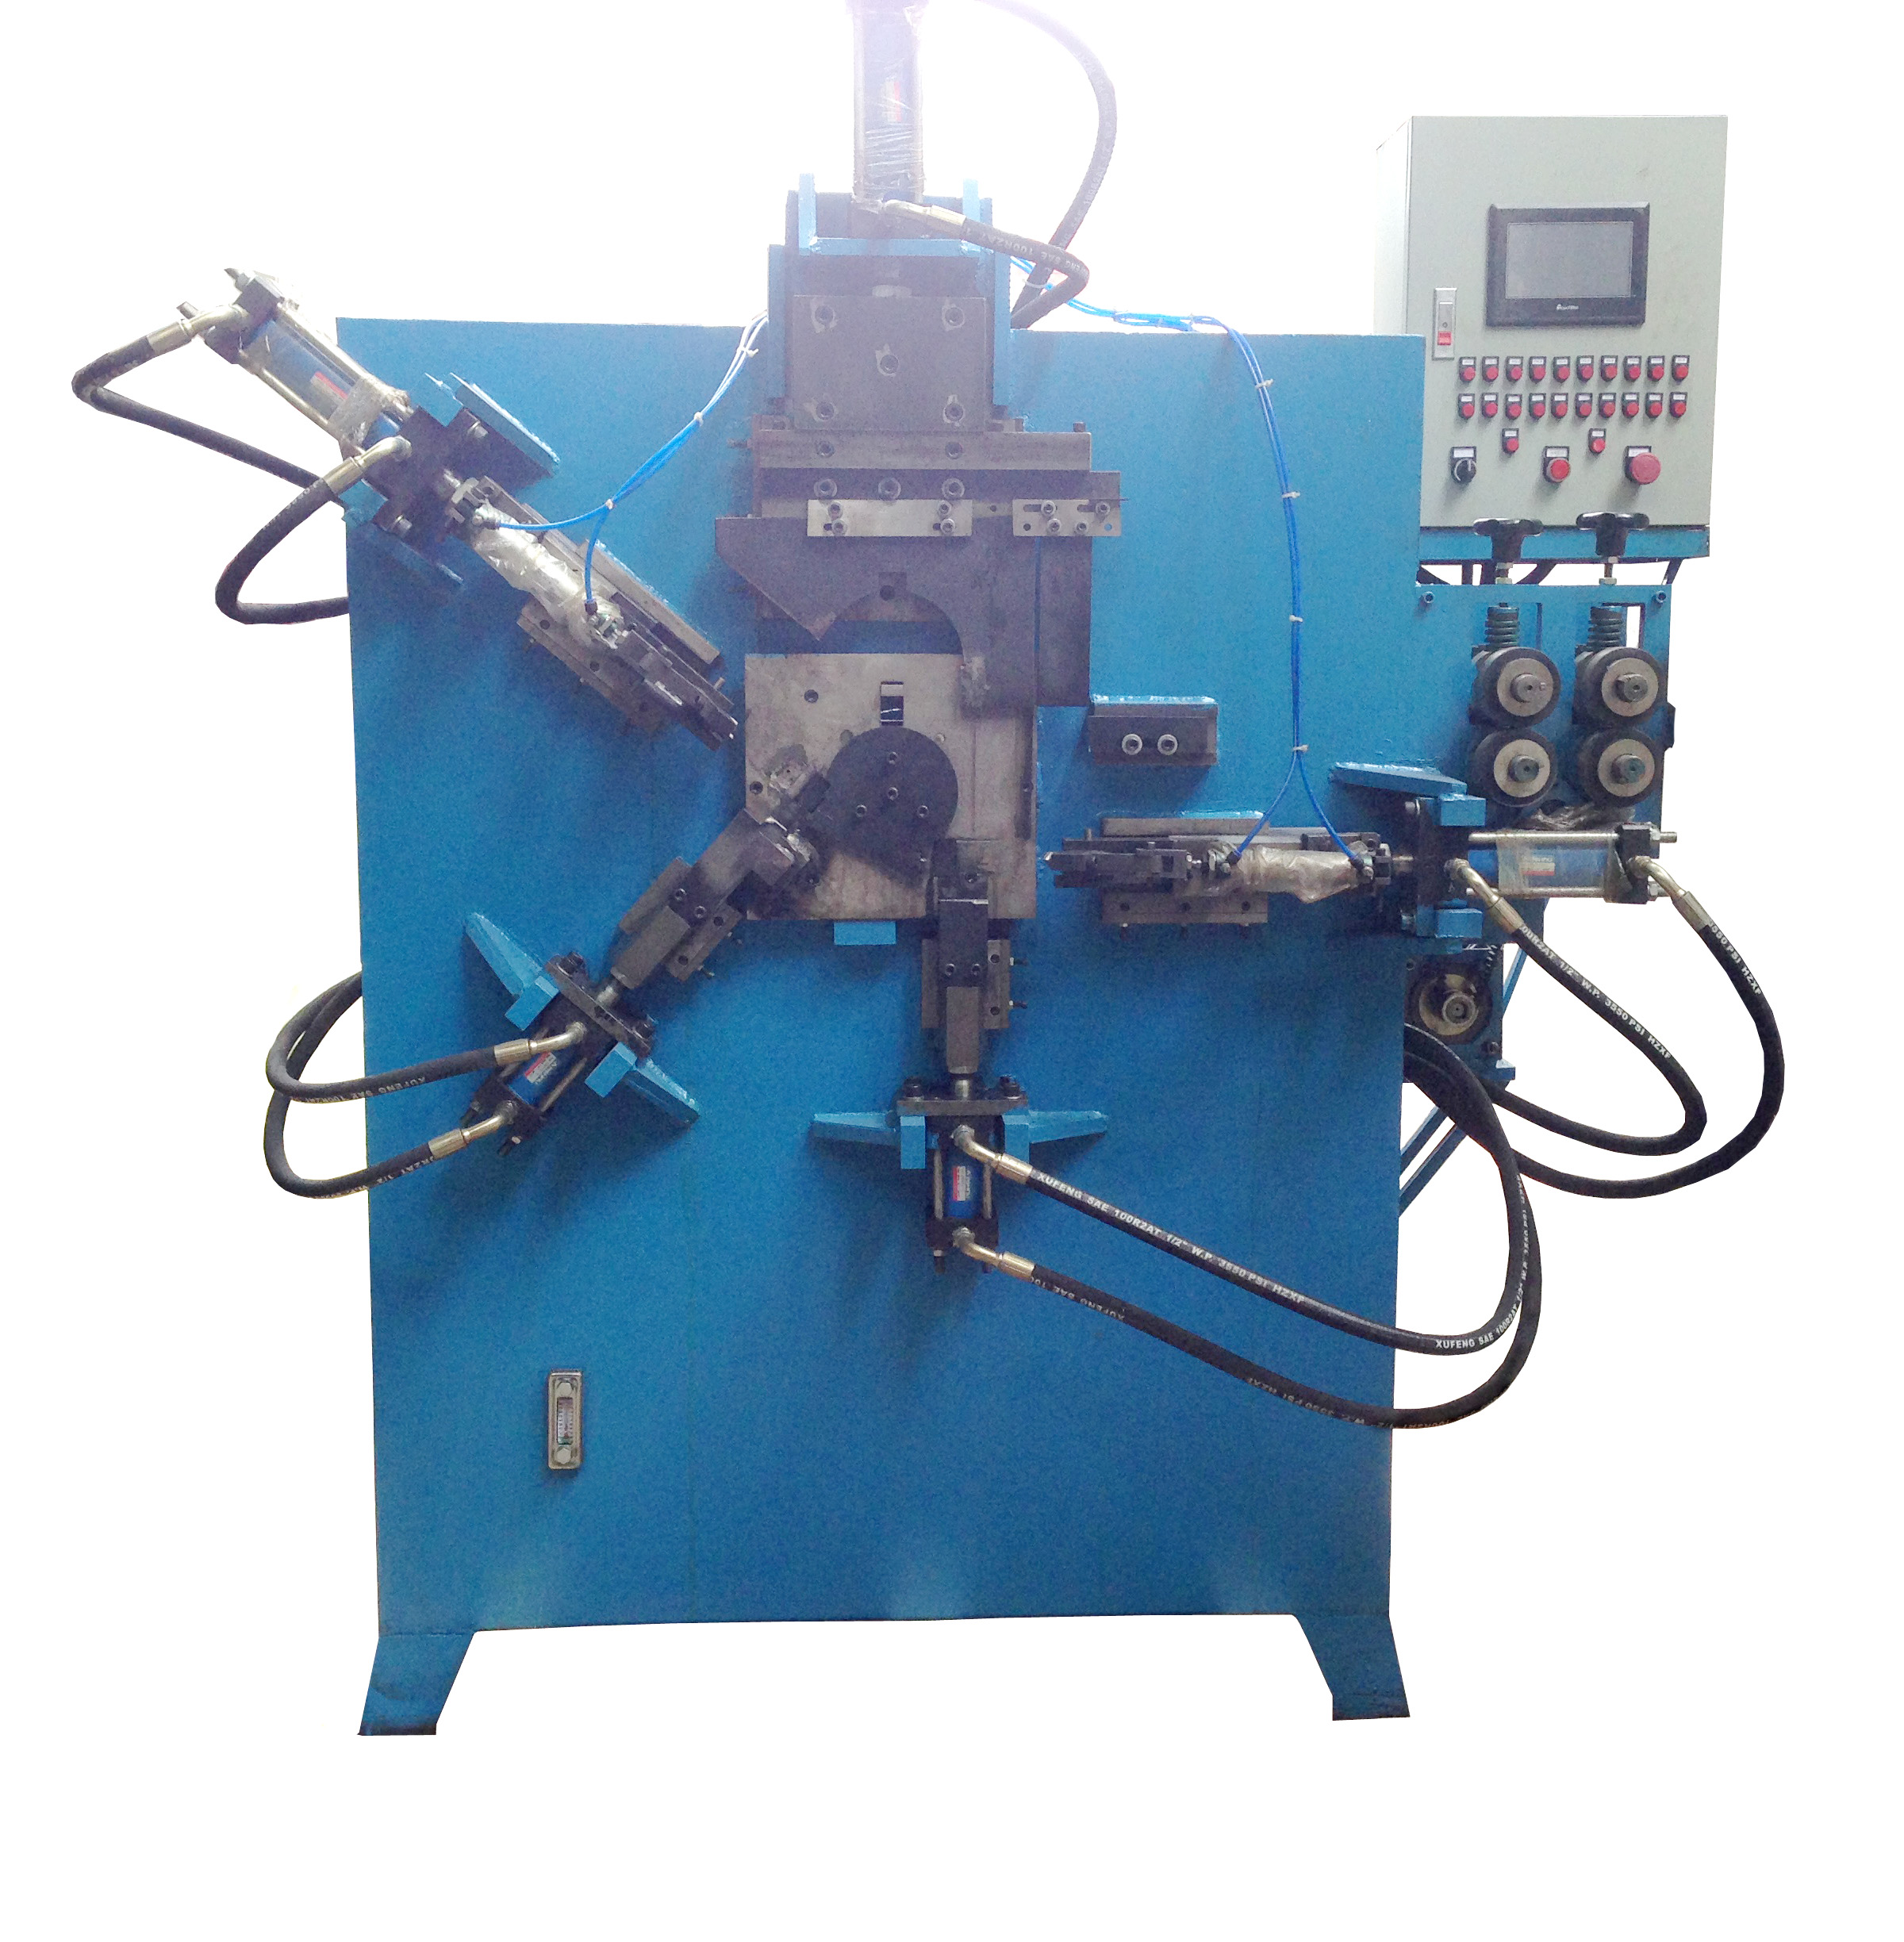 cnc bending machine Automatic Rubber Handle Buckle Forming Equipment Barrel Metal Can Handle Bending Machine Bucket hook handle machine